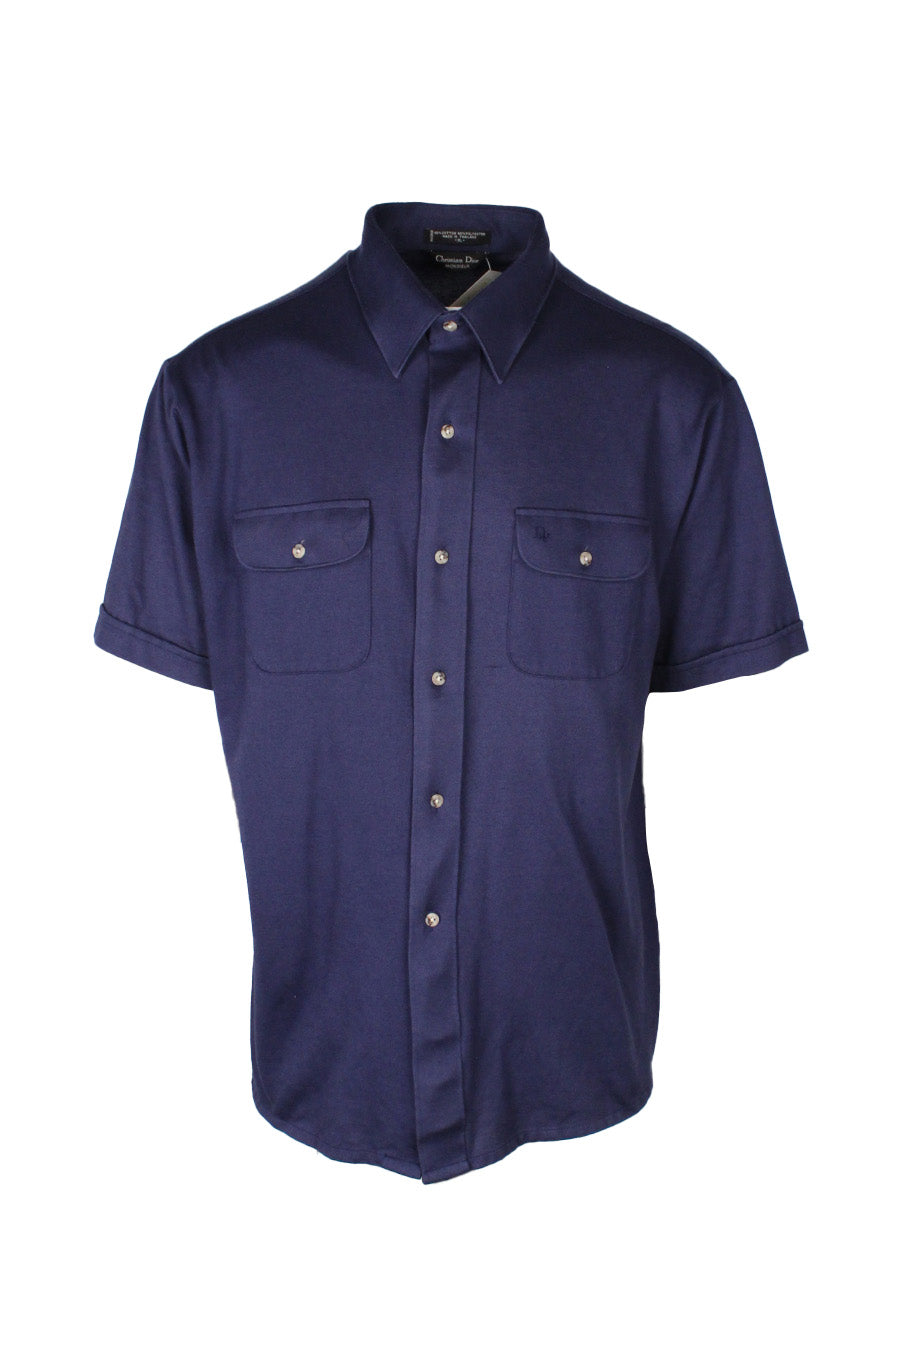 front view of christian dior monsieur navy short sleeve button up shirt. features ‘dior’ logo embroidered at button flap left breast pocket.